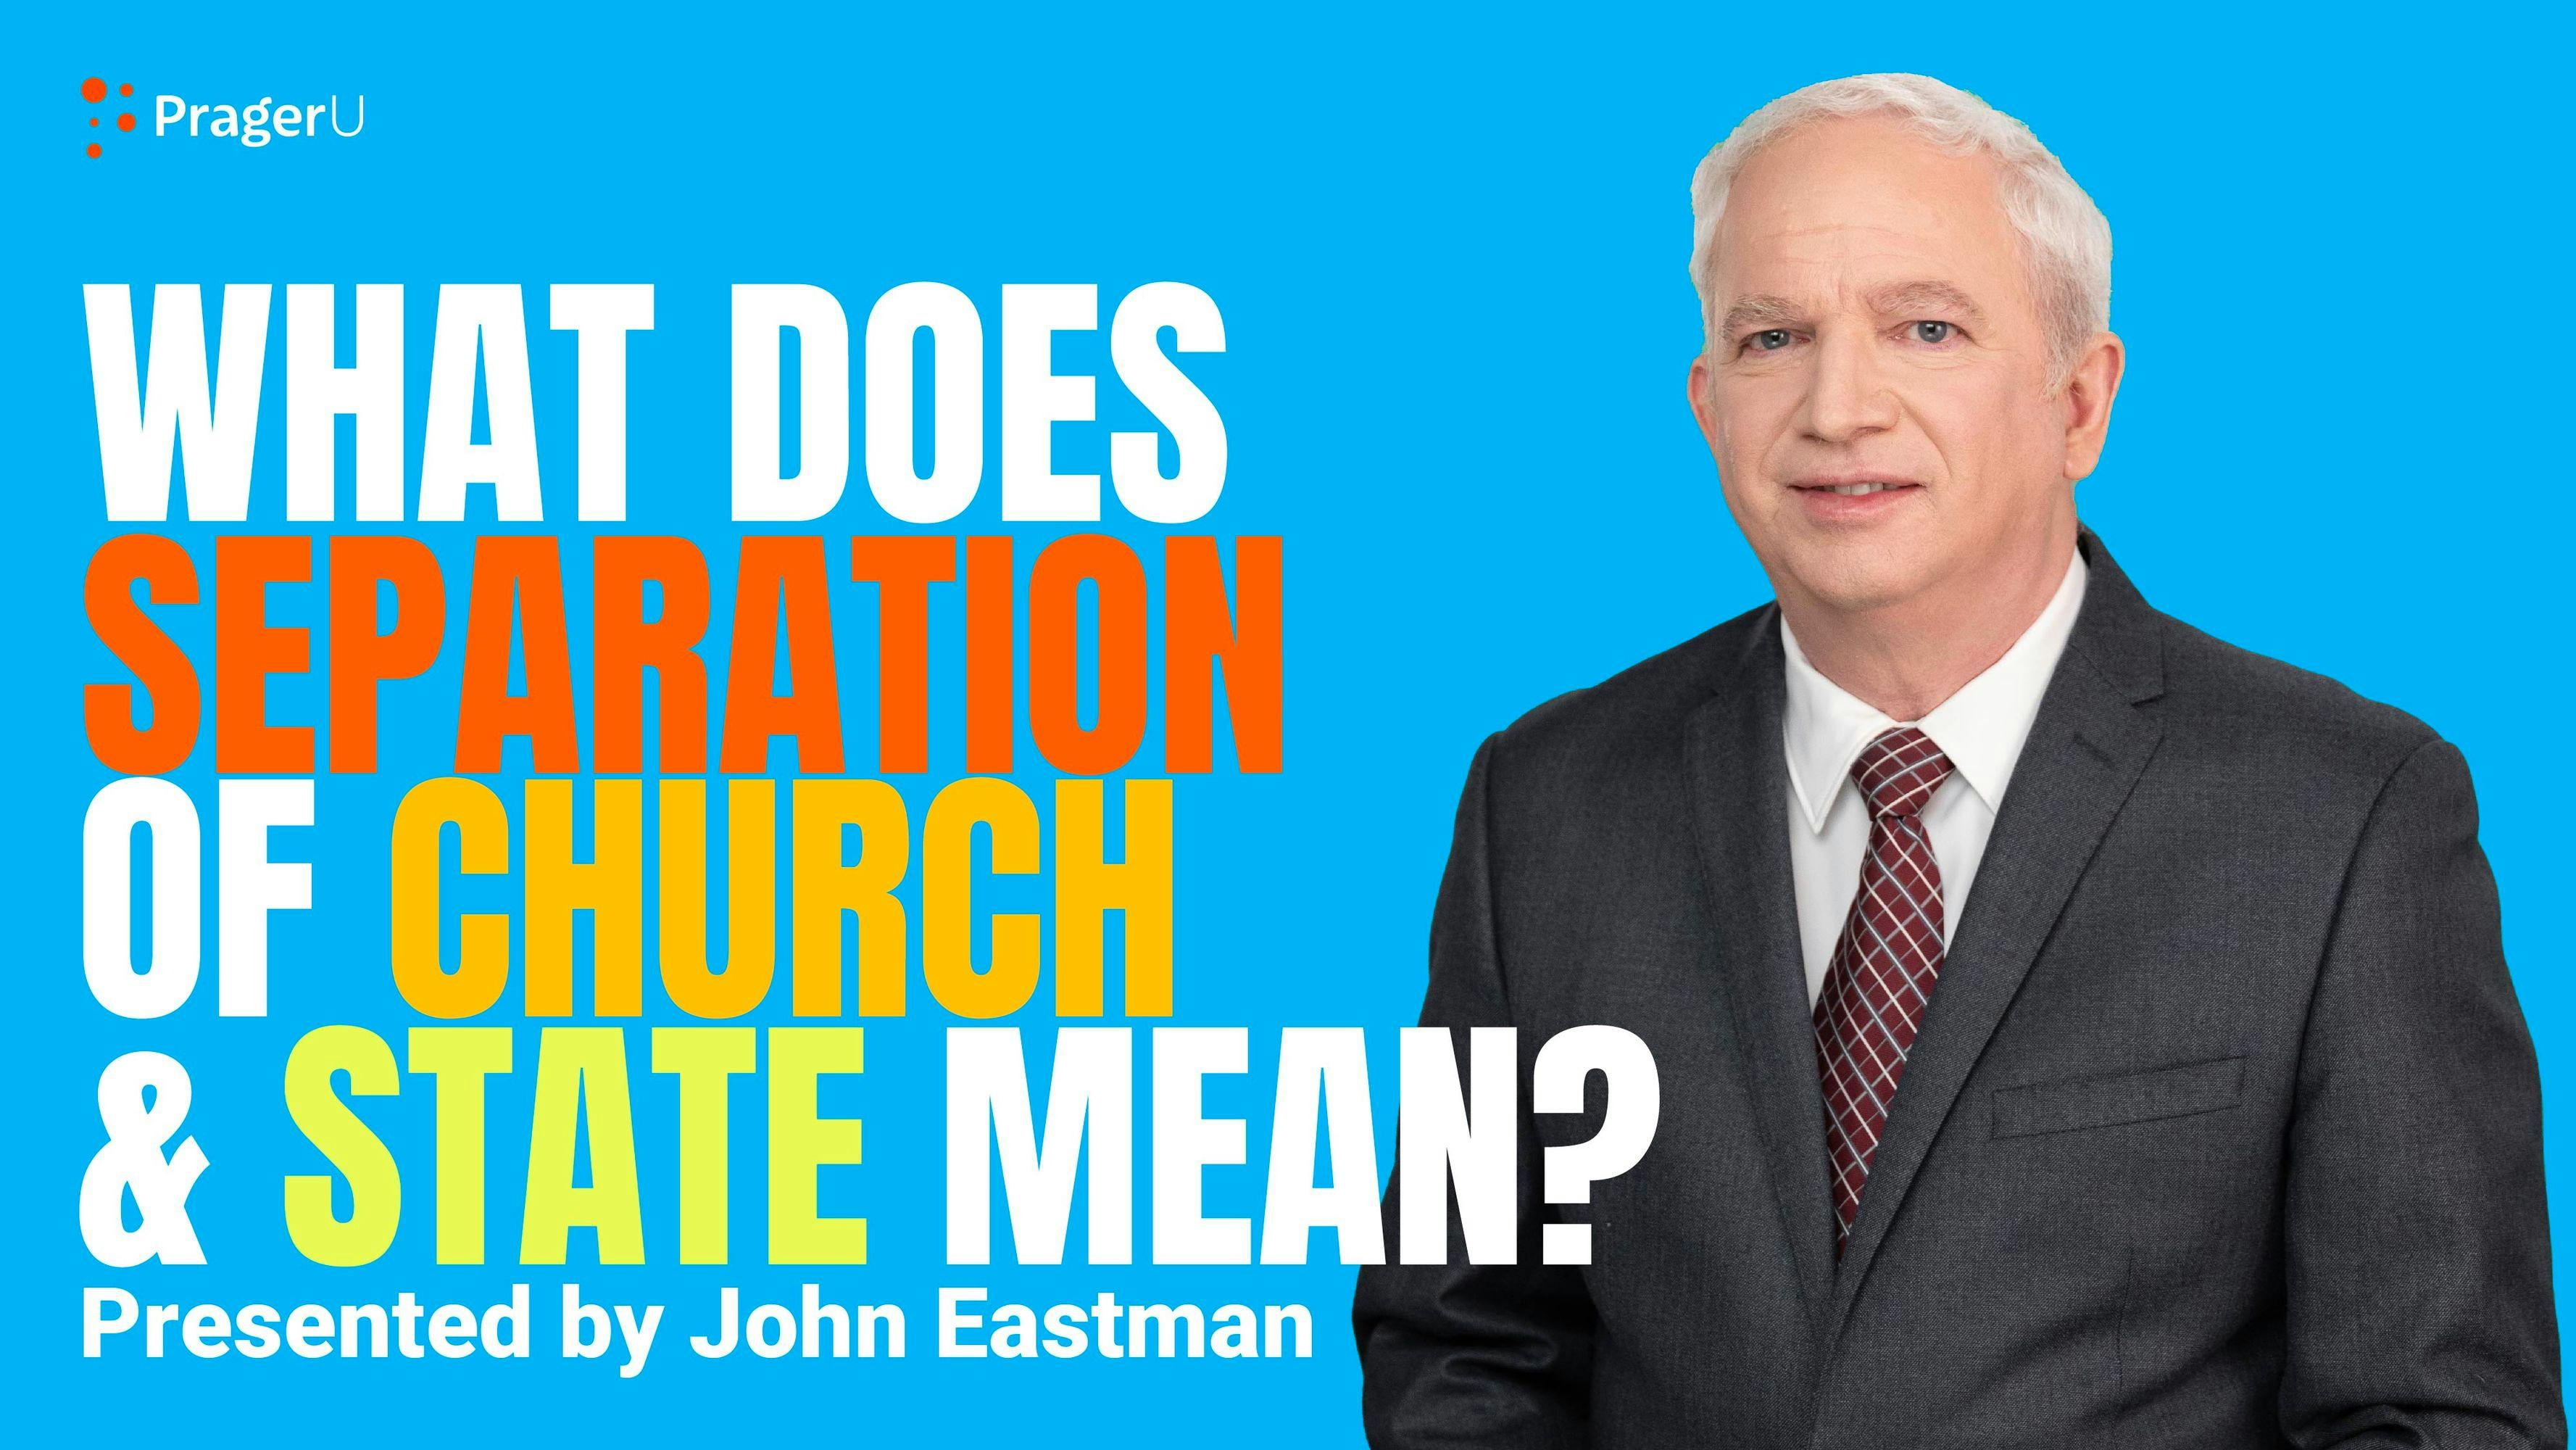 What Does Separation of Church and State Mean?